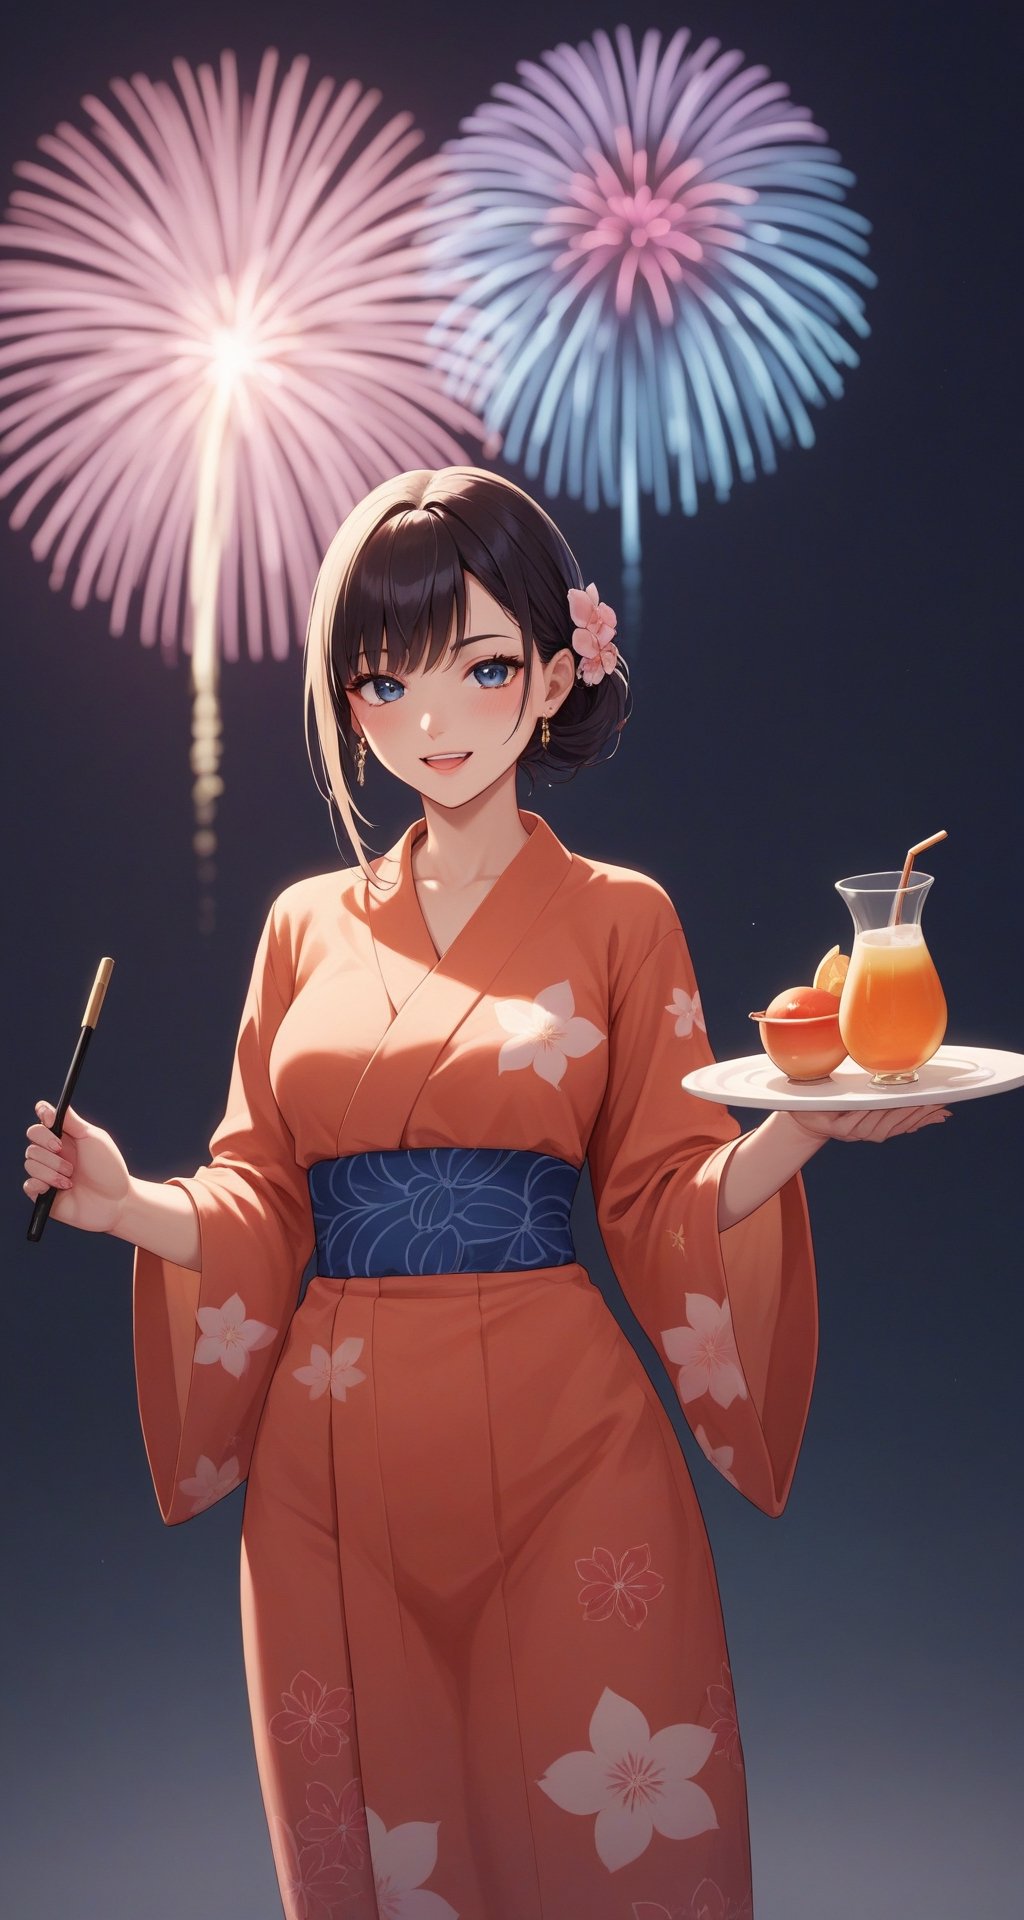 score_9, score_8_up, score_7_up, score_6_up, score_5_up, score_4_up, source_Anime, A gracefully adorned Japanese girl in a colorful yukata, amidst a summer festival’s fireworks display. Every fold of her garment is intricately patterned, complementing the vibrant bursts of light in the background. The image, likely a painting, captures her delicate features and the dynamic energy of the festival scene in exquisite detail. The technicolor fireworks mirror the girl's lively spirit, creating a mesmerizing and high-quality composition that immerses viewers in a moment of cultural celebration and beauty.